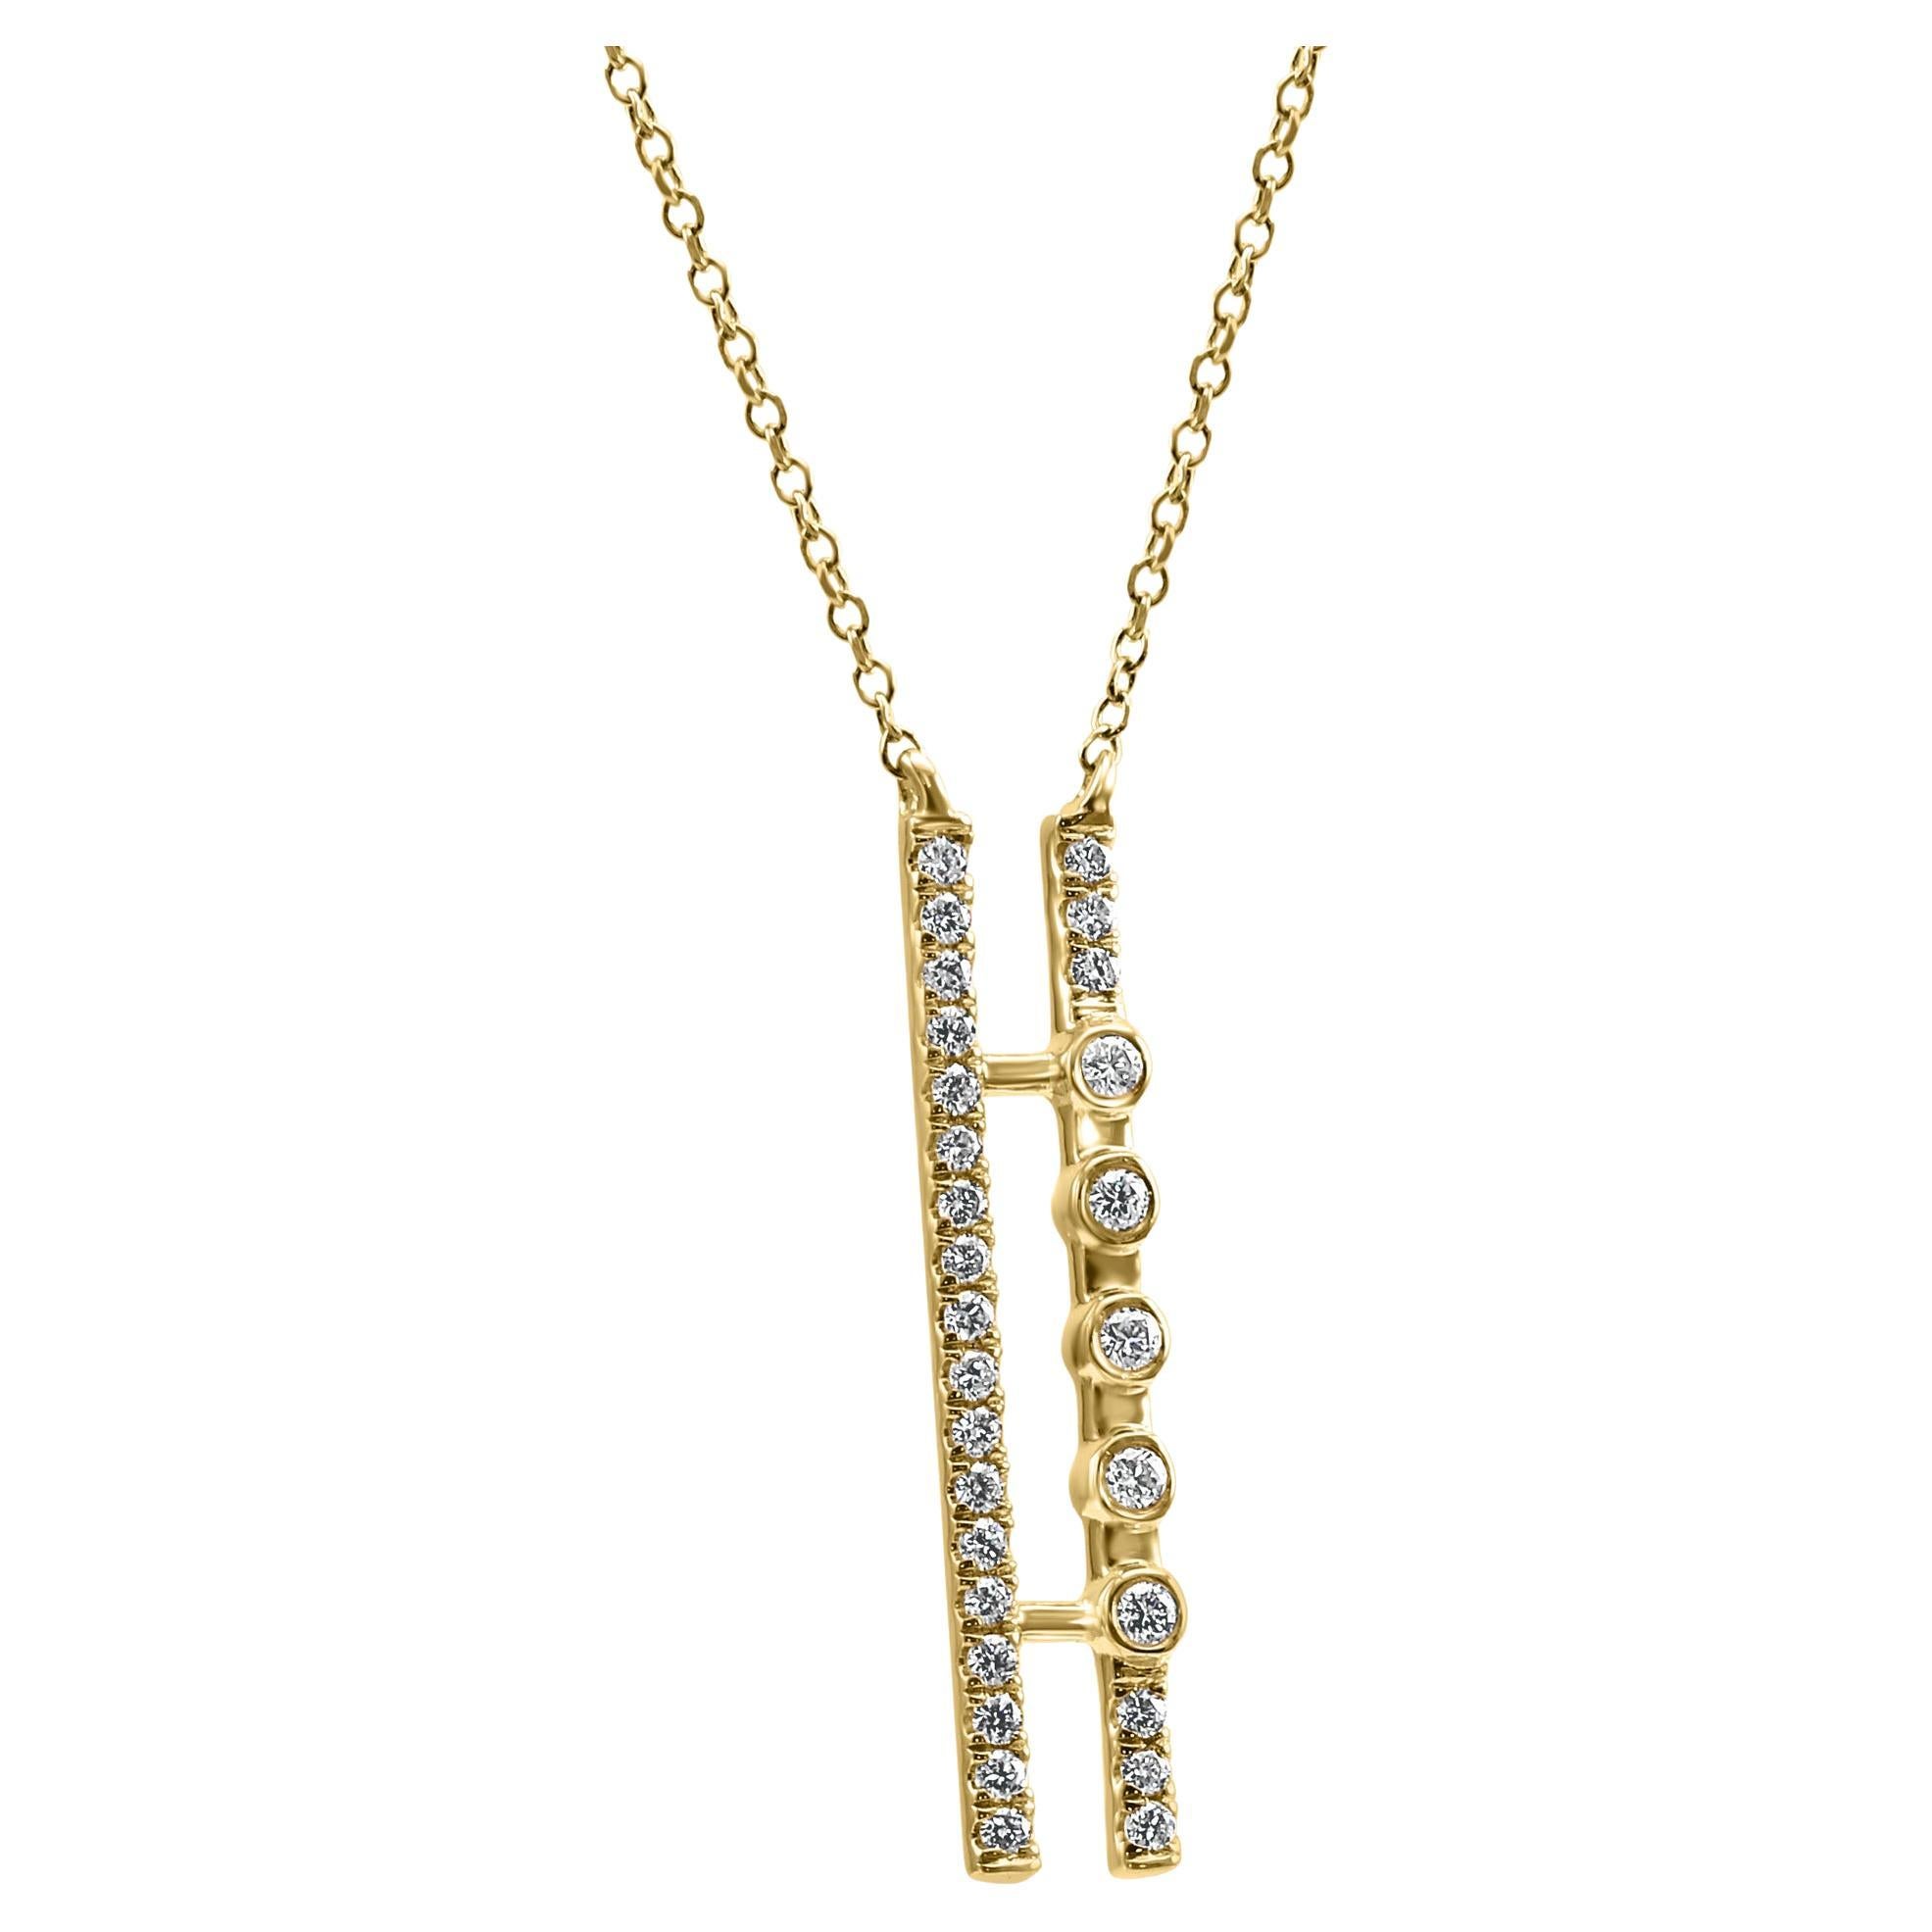 Elevate your neckline with our beautiful 14K Yellow Gold pendant necklace, adorned with a dazzling array of White Diamond Rounds.

The pendant is set with a brilliant collection of White Diamond Rounds, chosen to showcase their natural brilliance.